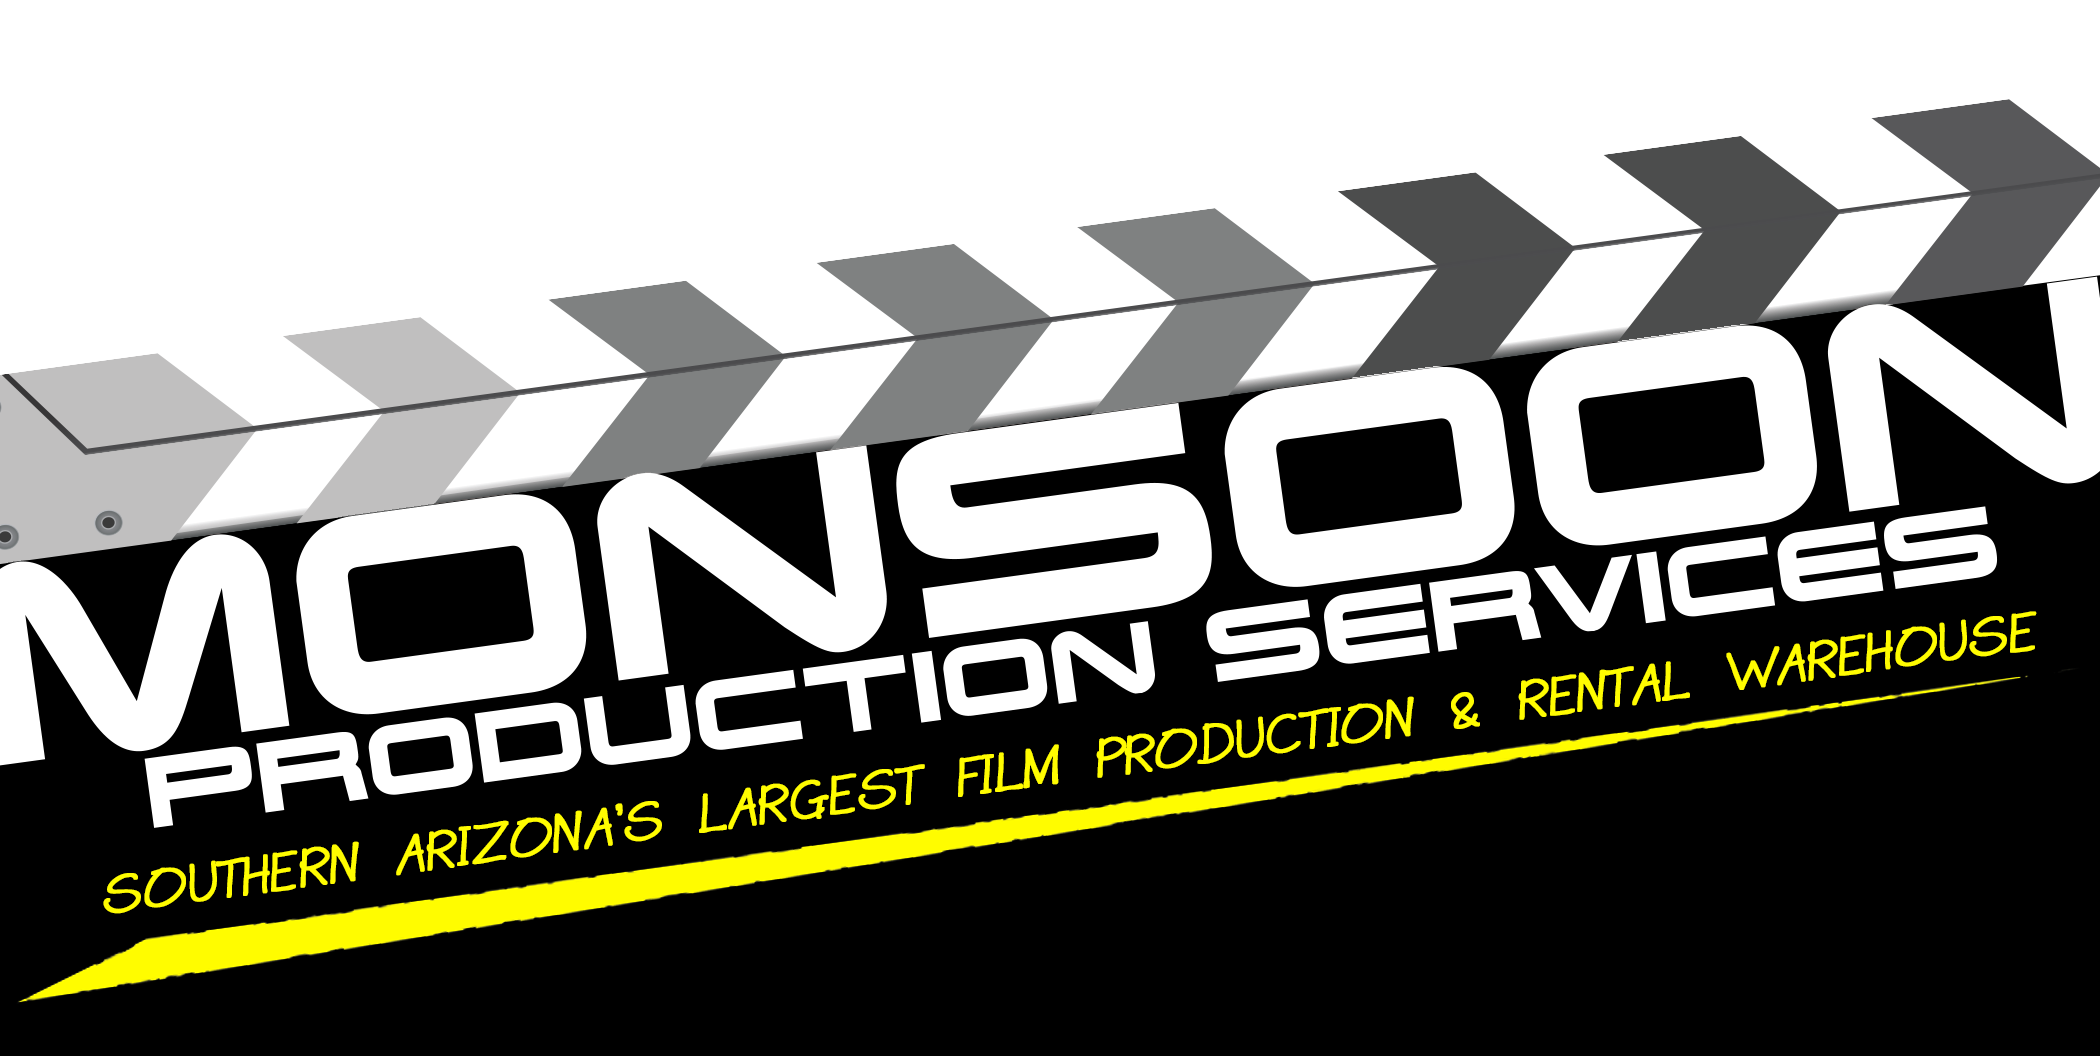 Monsoon Production Services